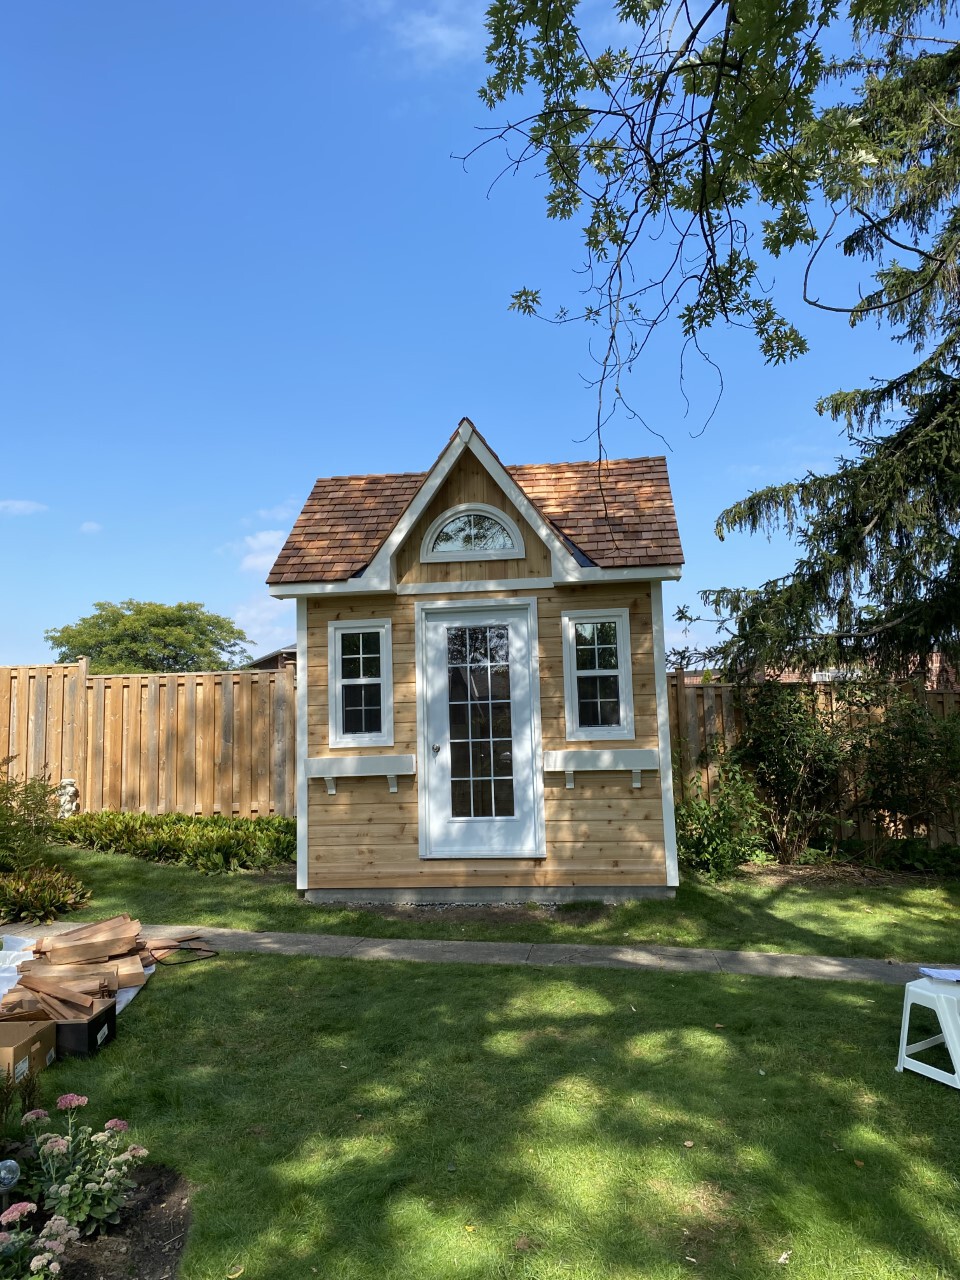 Front view of 8’ x 10' Copper Creek Garden Shed located in Pickering, Ontario – Summerwood Produ